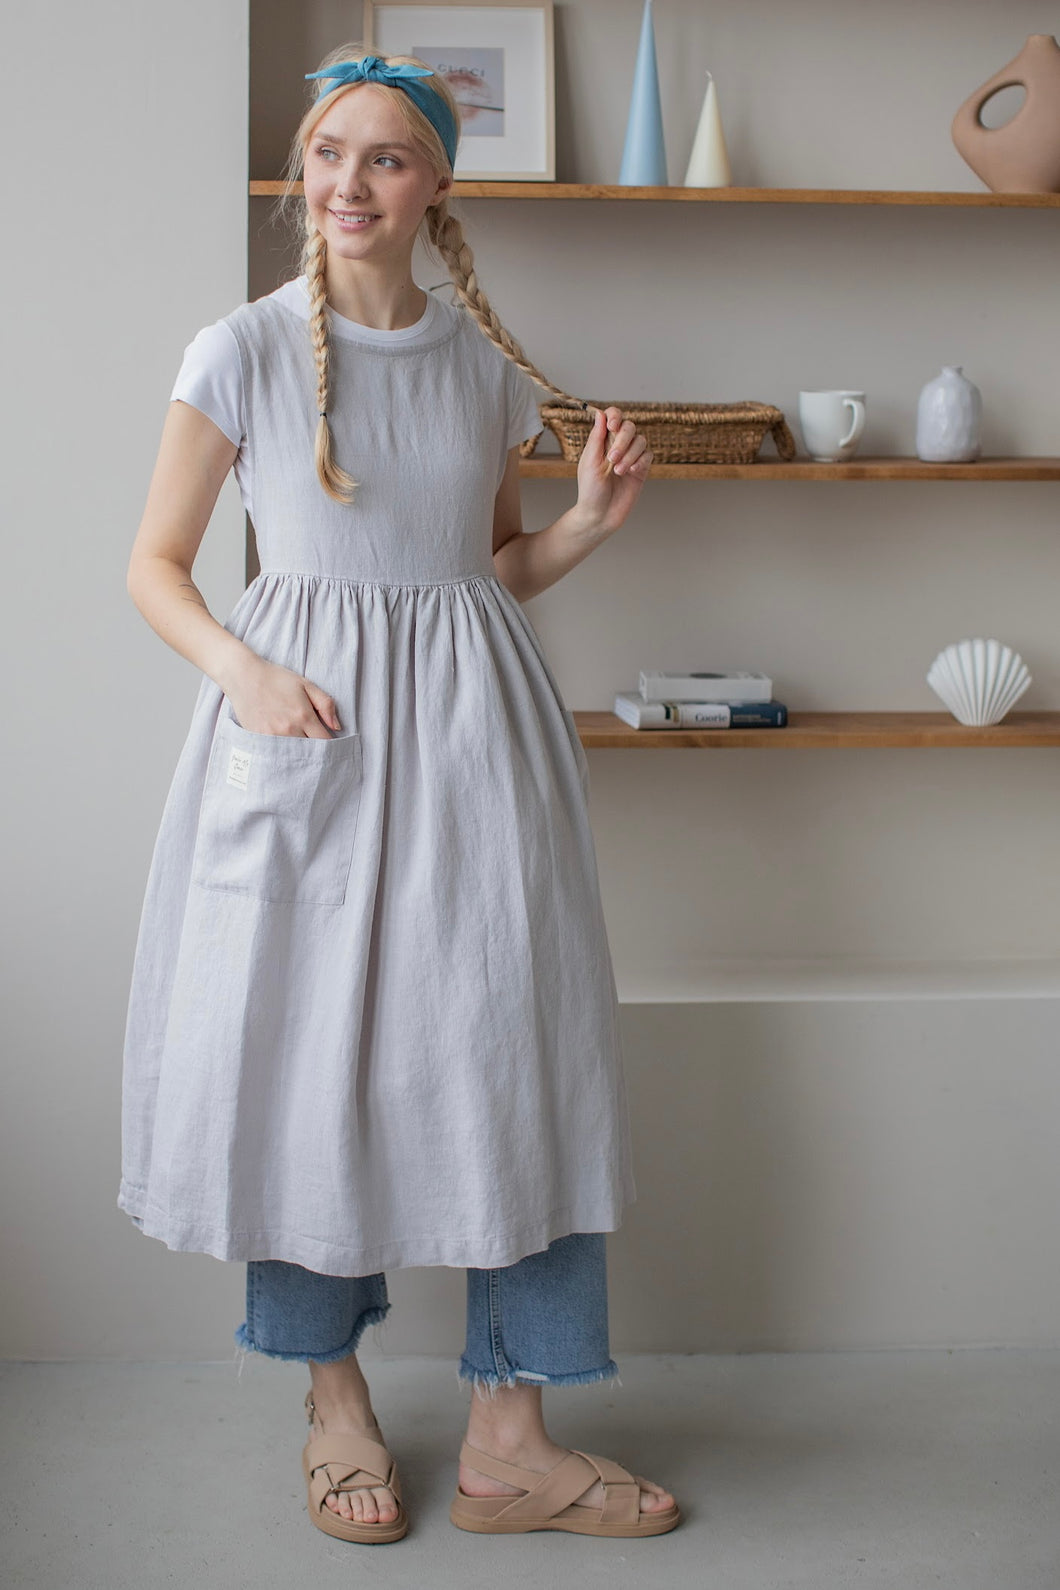 100% Linen Cottage Dress Apron in Silver